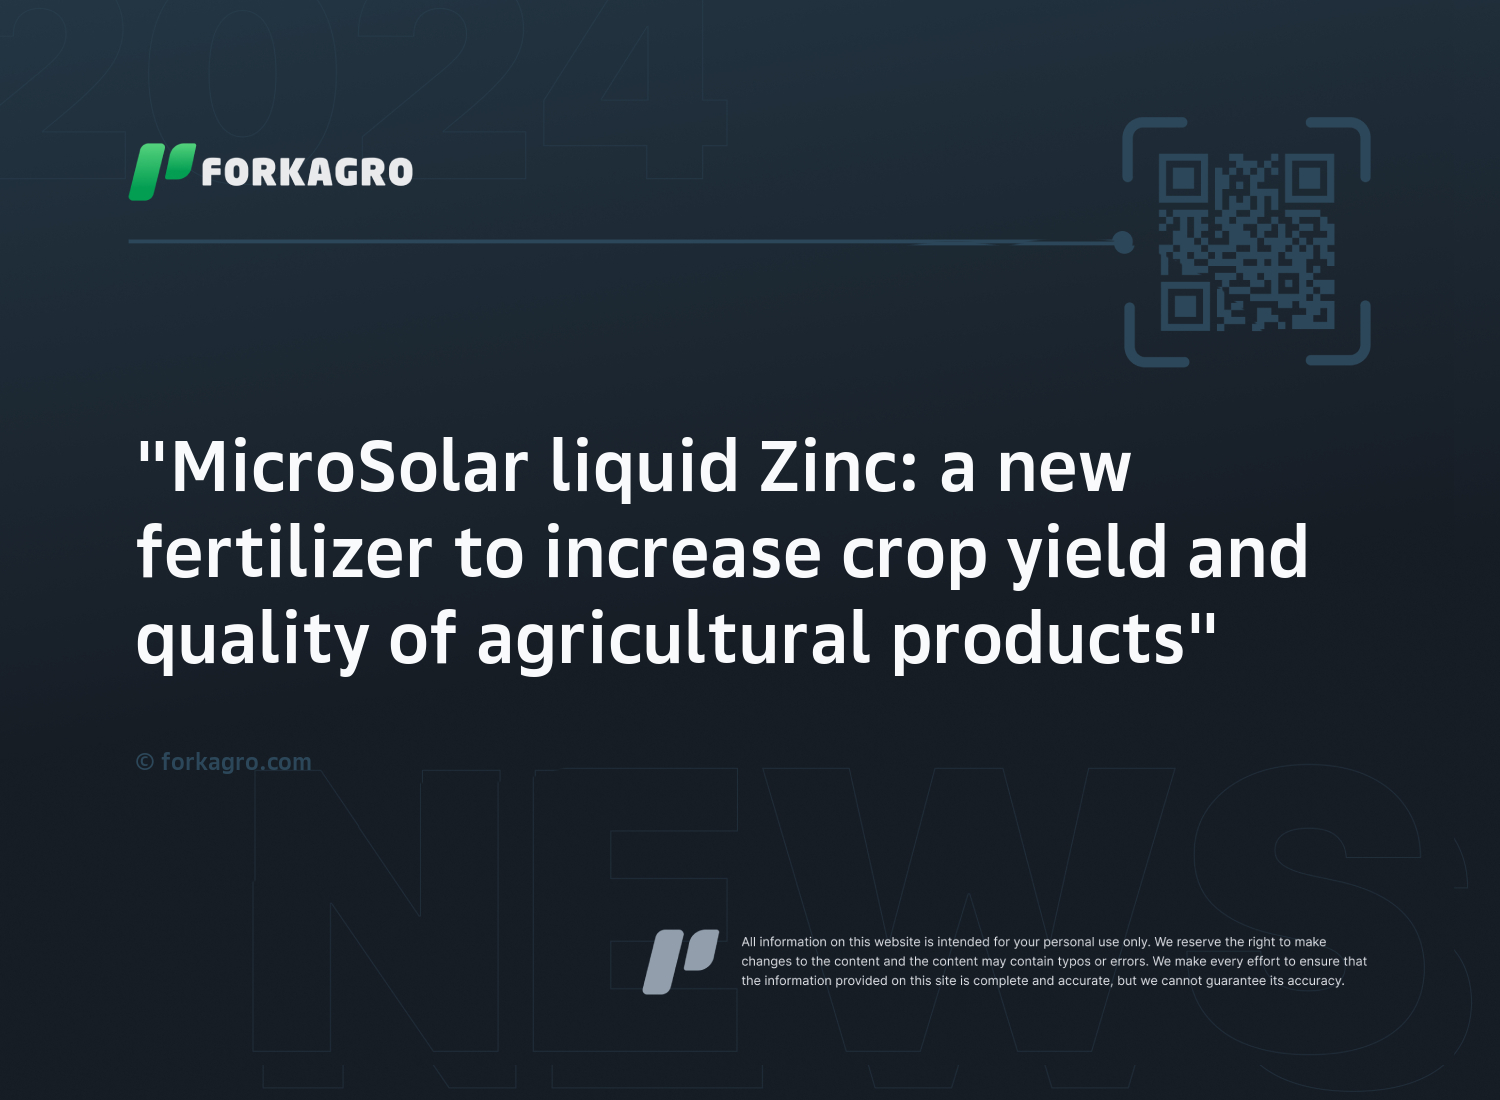 "MicroSolar liquid Zinc: a new fertilizer to increase crop yield and quality of agricultural products"